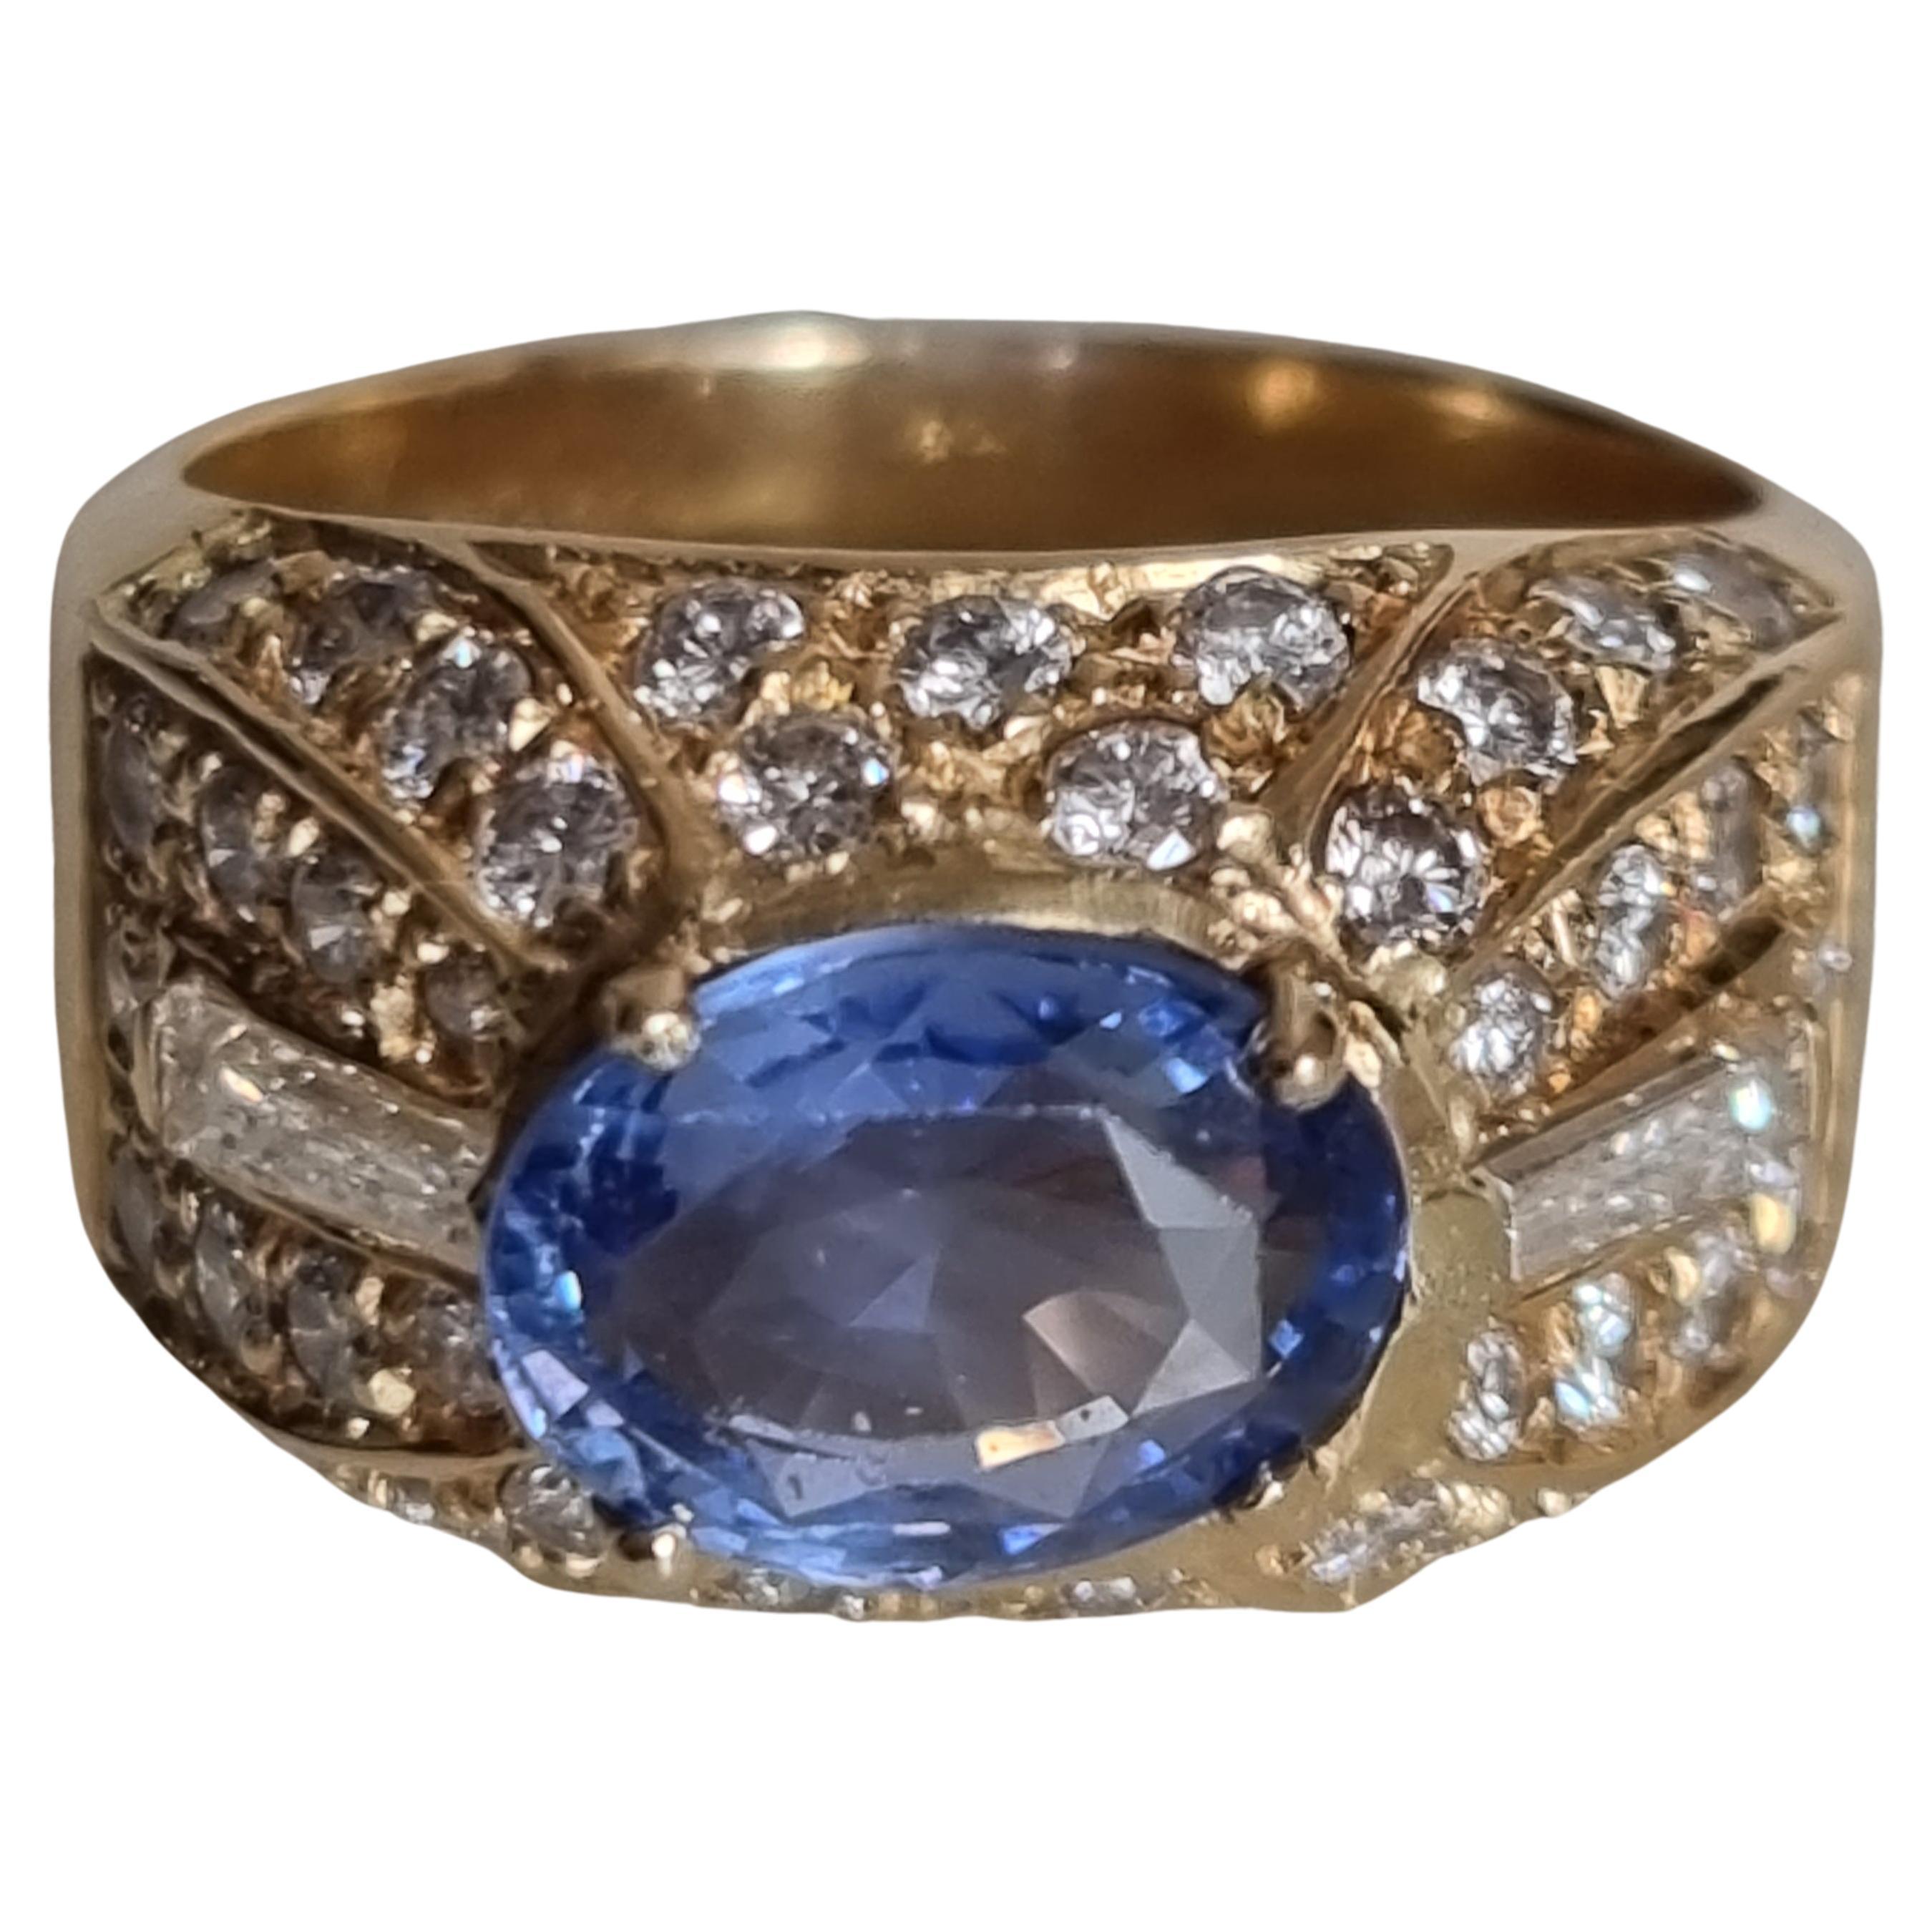 Vintage Blue Sapphire and Diamond Bombé Ring, signed by FÜRST (Rome) in 18K yellow Gold.
A vintage blue sapphire and diamond bombé ring, set with an oval cut sapphire, weighing 2.10ct, in the centre (8.80 X 6.88 X 4.31mm), with diamond set round 46